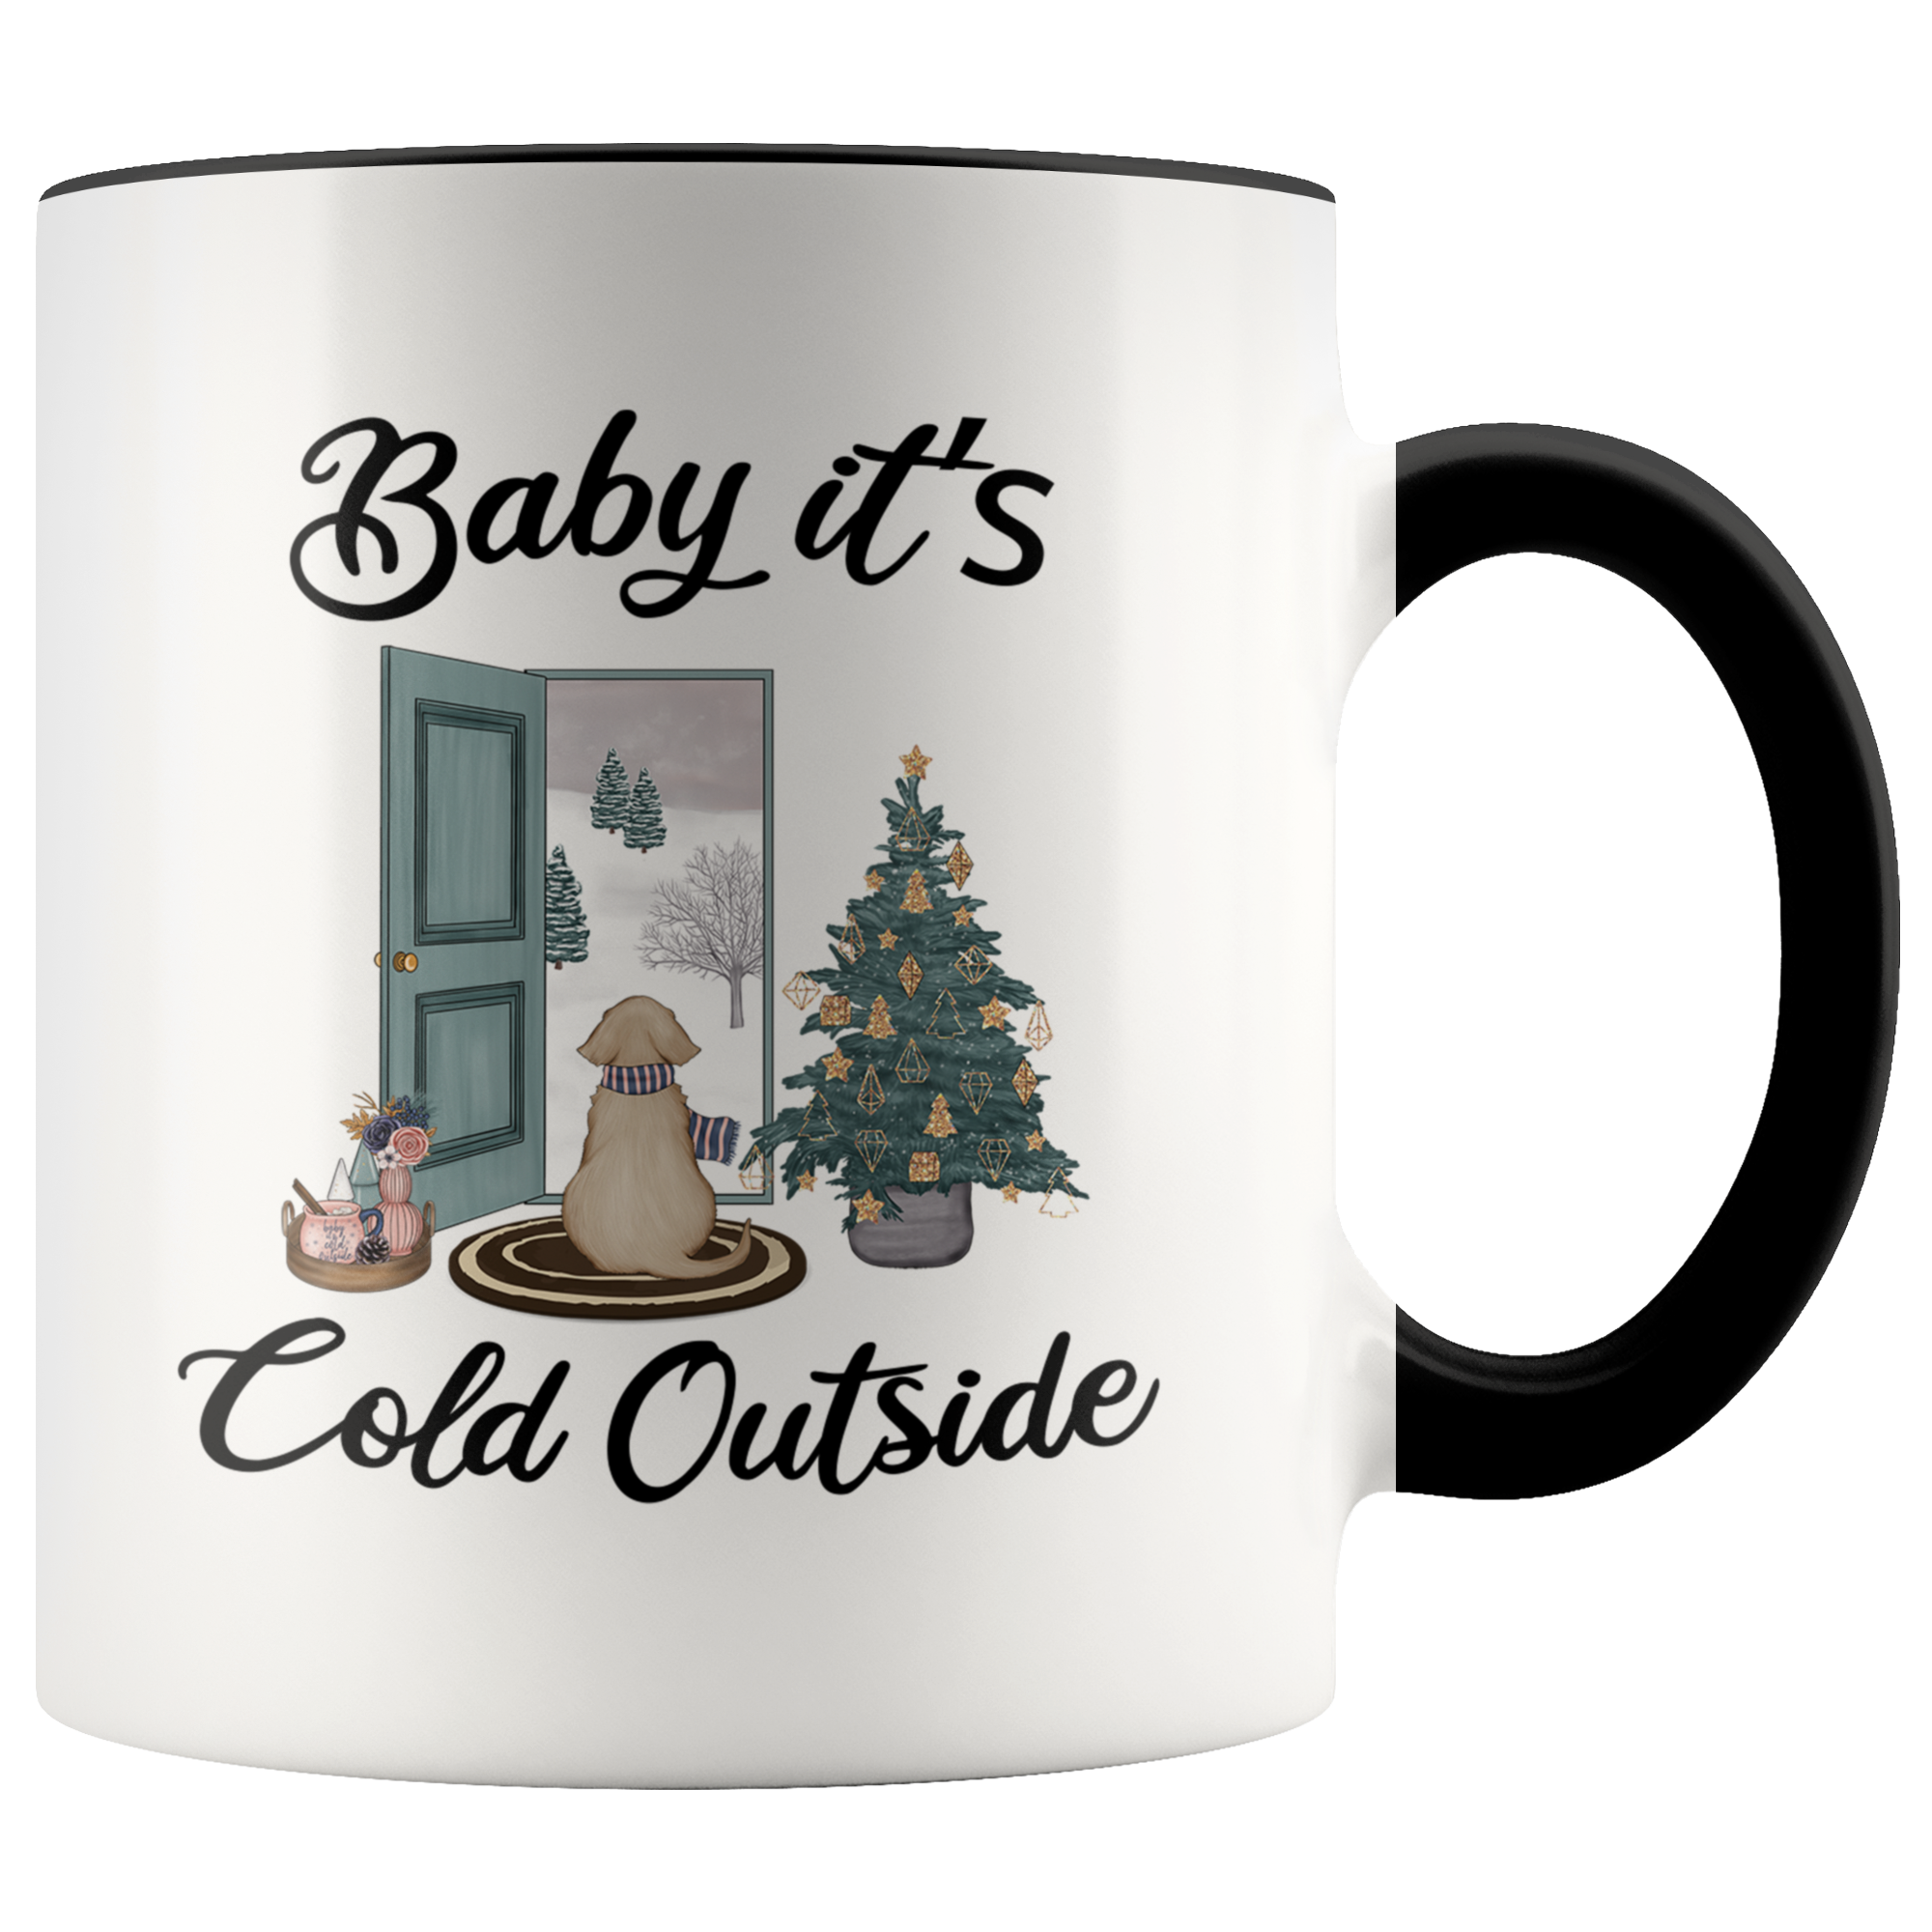 Baby it's Cold Outside Mug Christmas Gift Cute Winter Mugs with Sayings Gift for Grandma Dog Lover Coffee Cup Stocking Stuffer